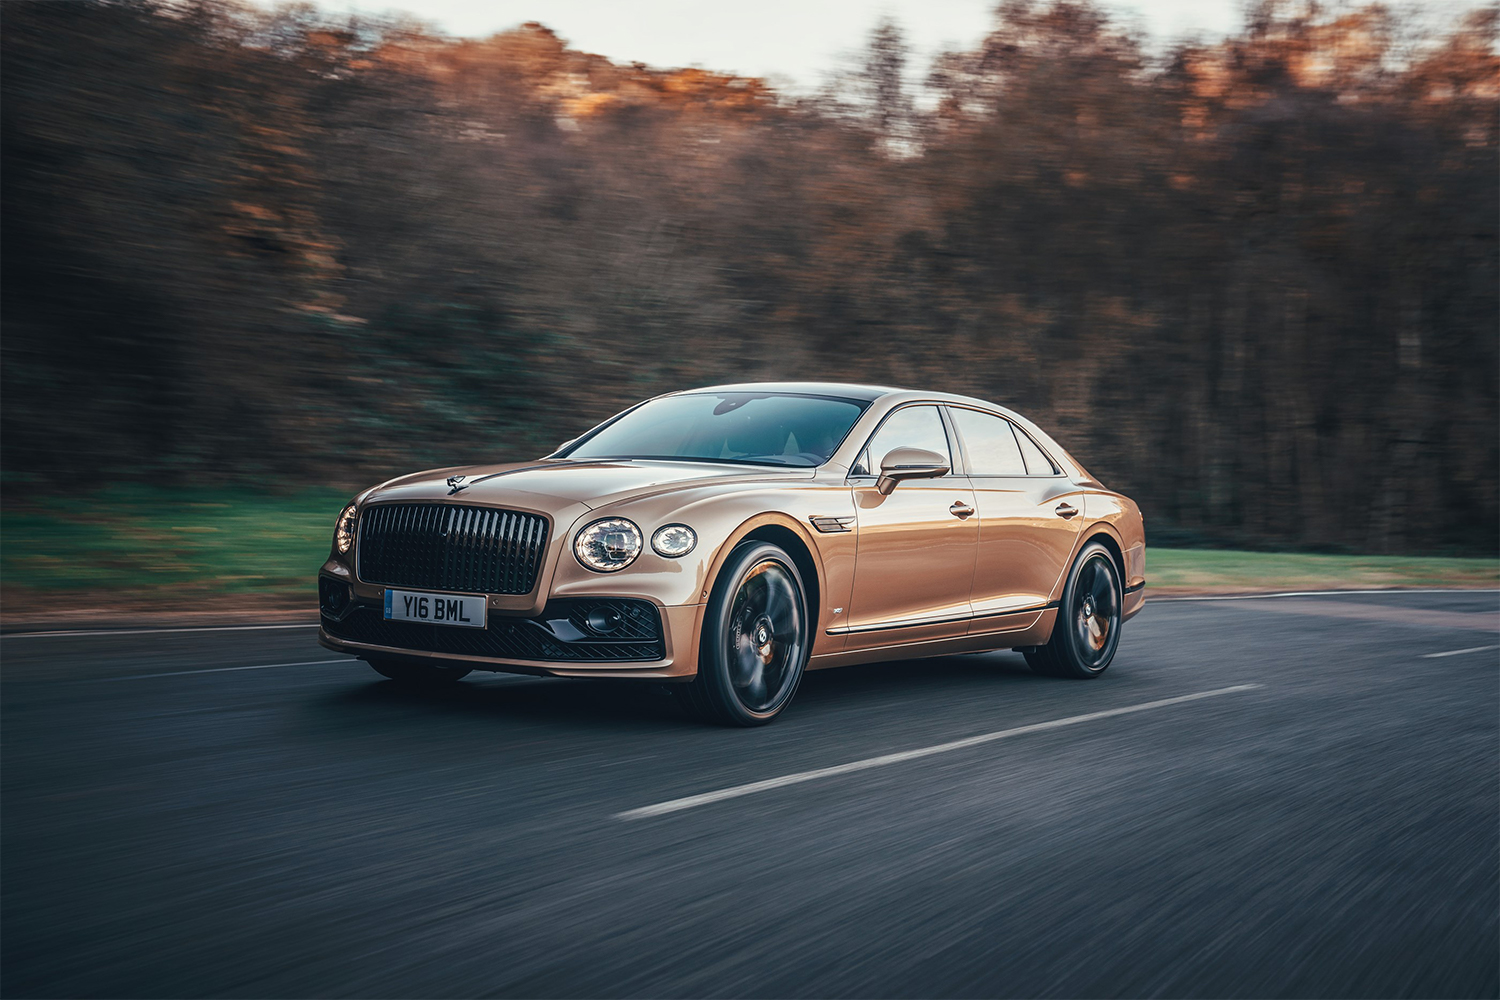 The Bentley Flying Spur, one of our favorite vehicles of 2021